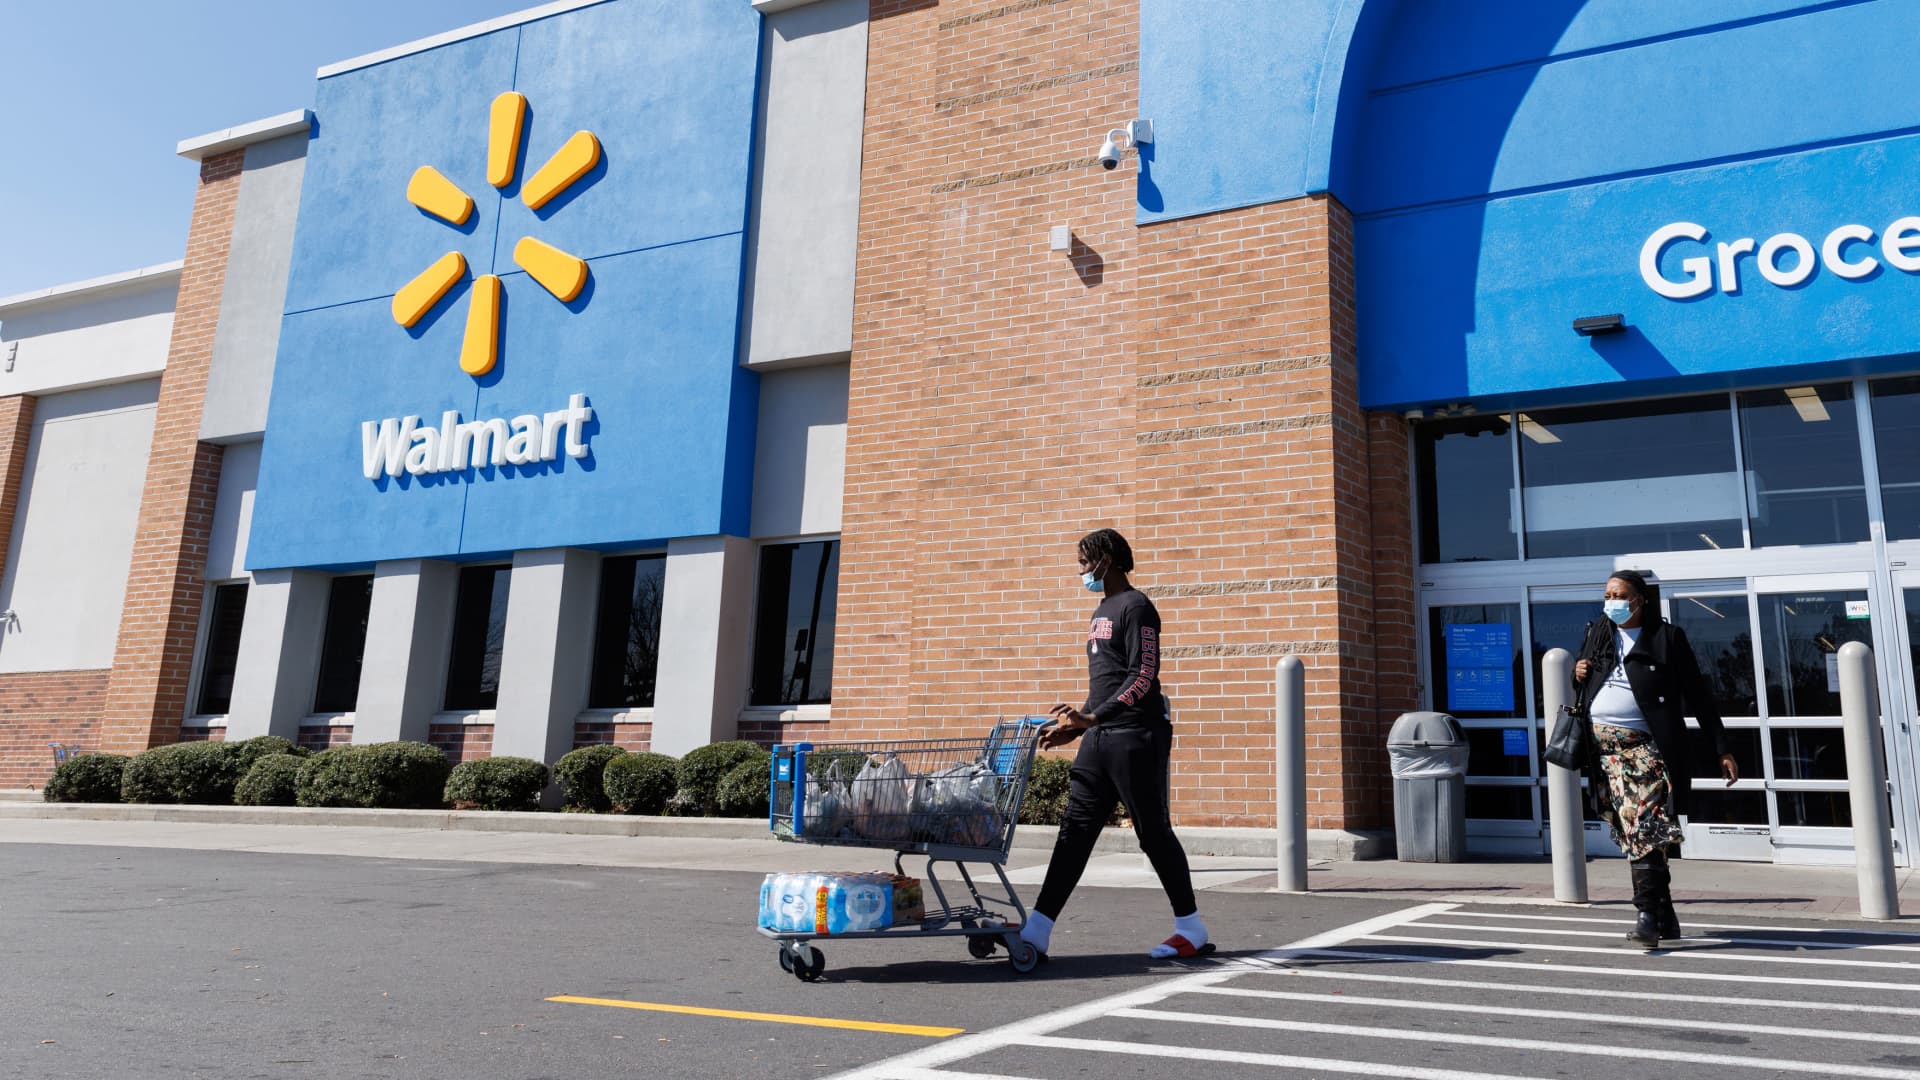 Walmart will report earnings before the bell. Here's what to expect